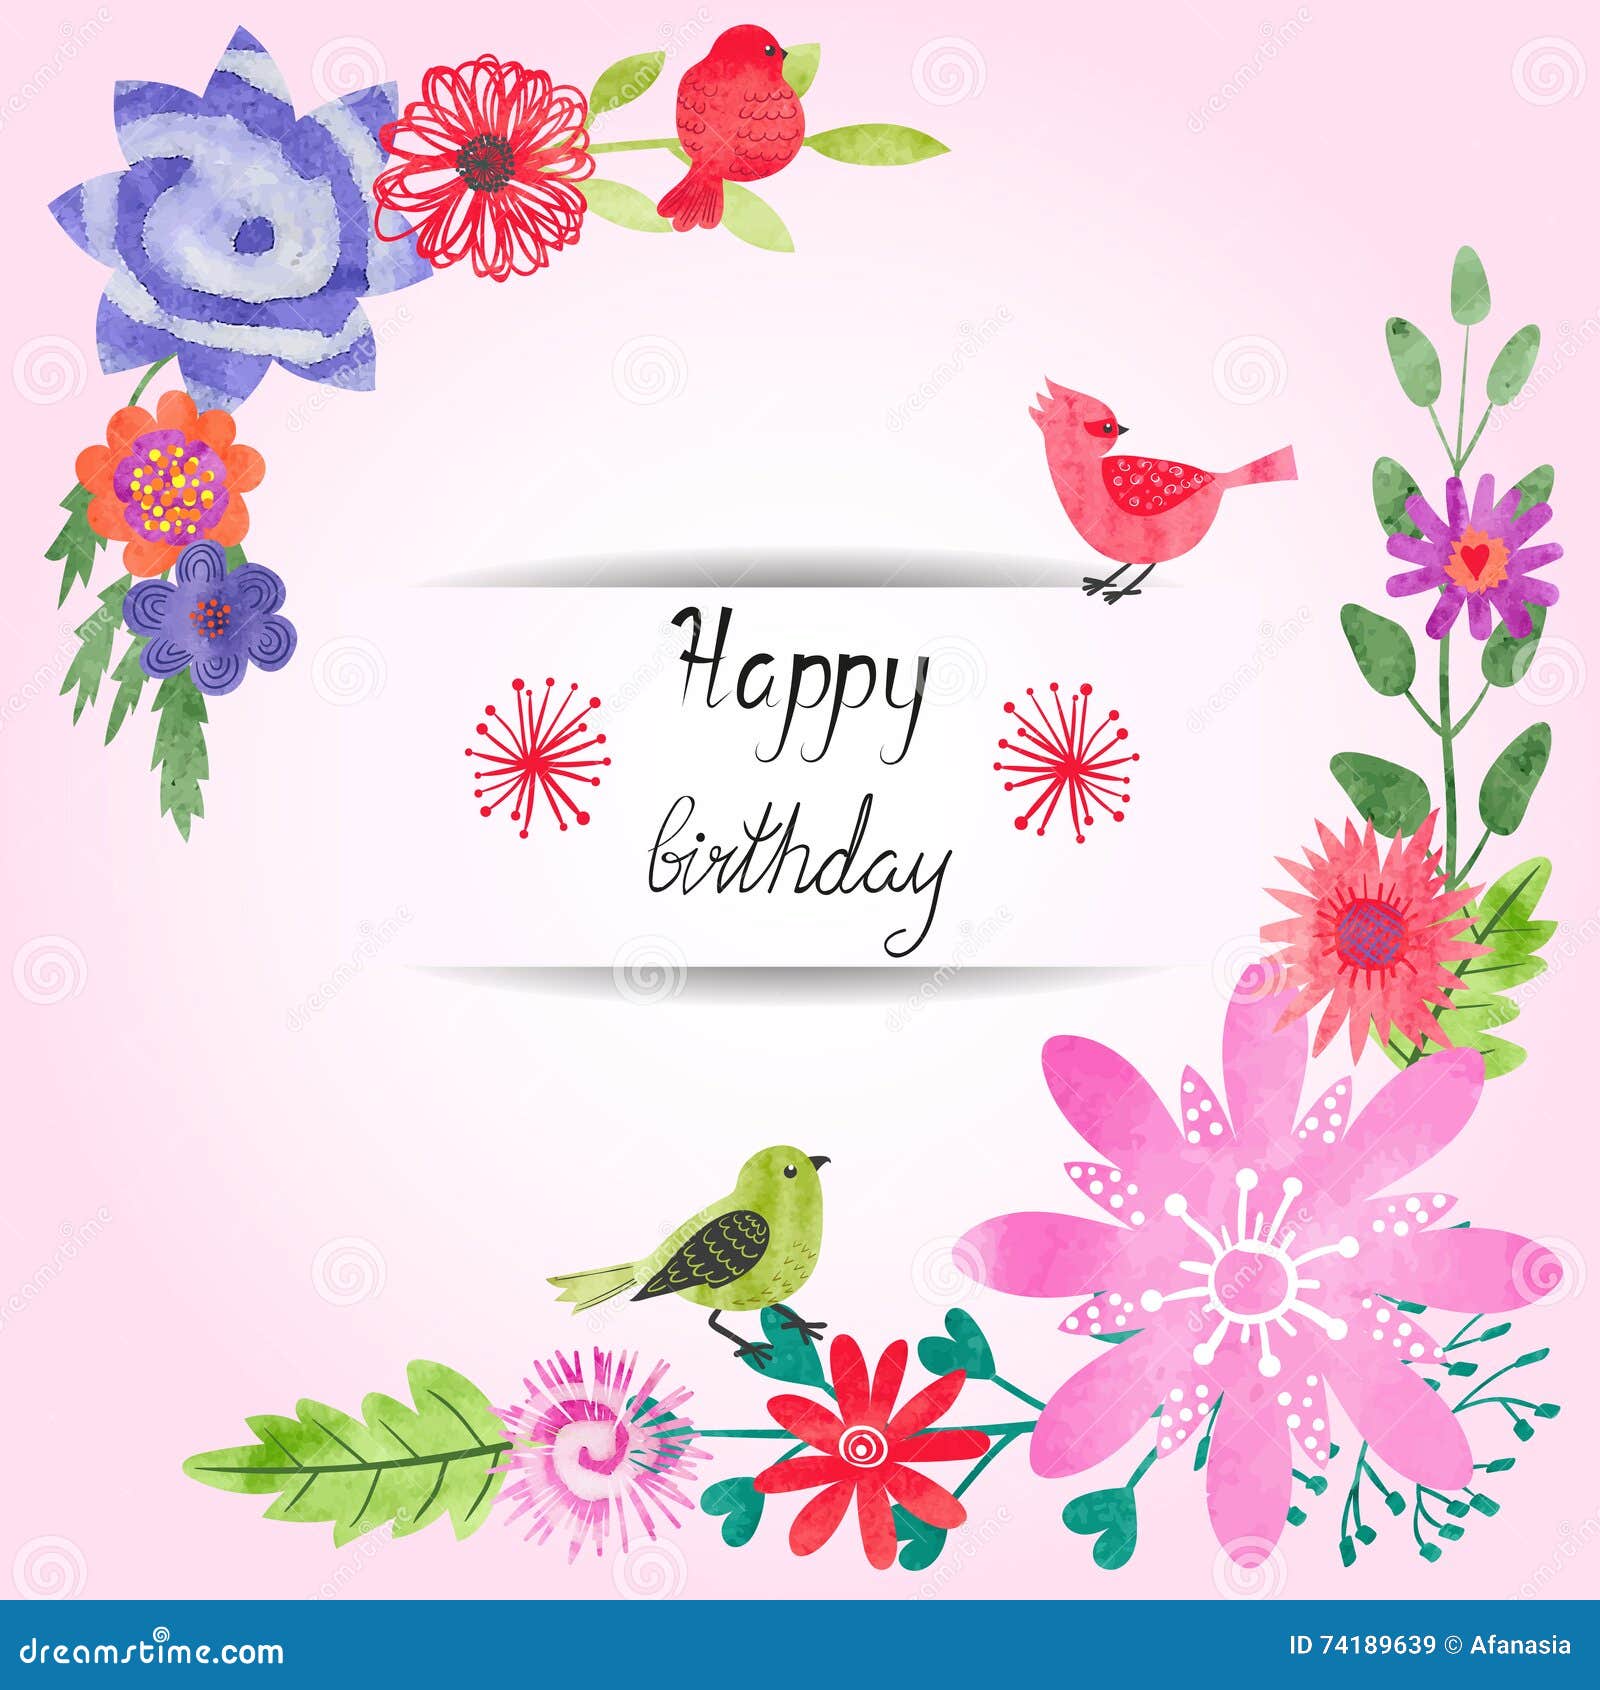 Birthday Card Design with Watercolor Flowers and Cute Birds Stock ...